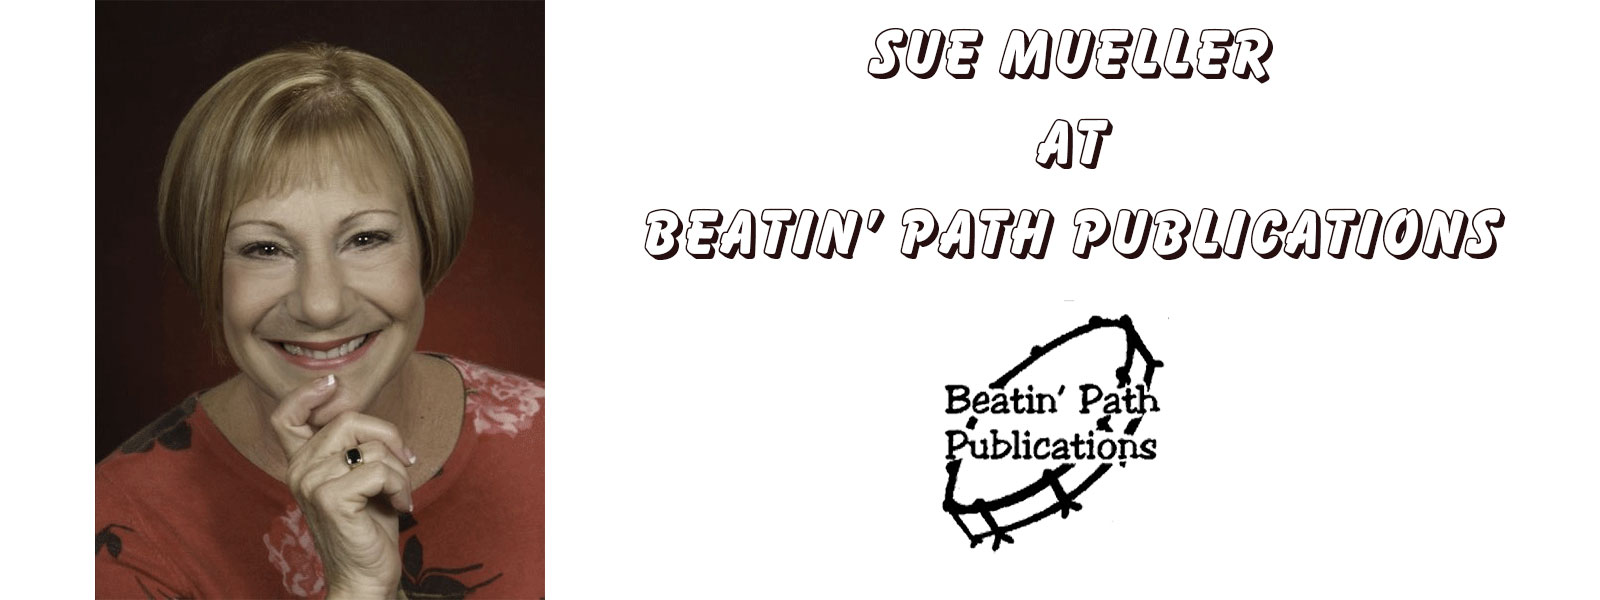 Sue Mueller at Beatin' Path Publications